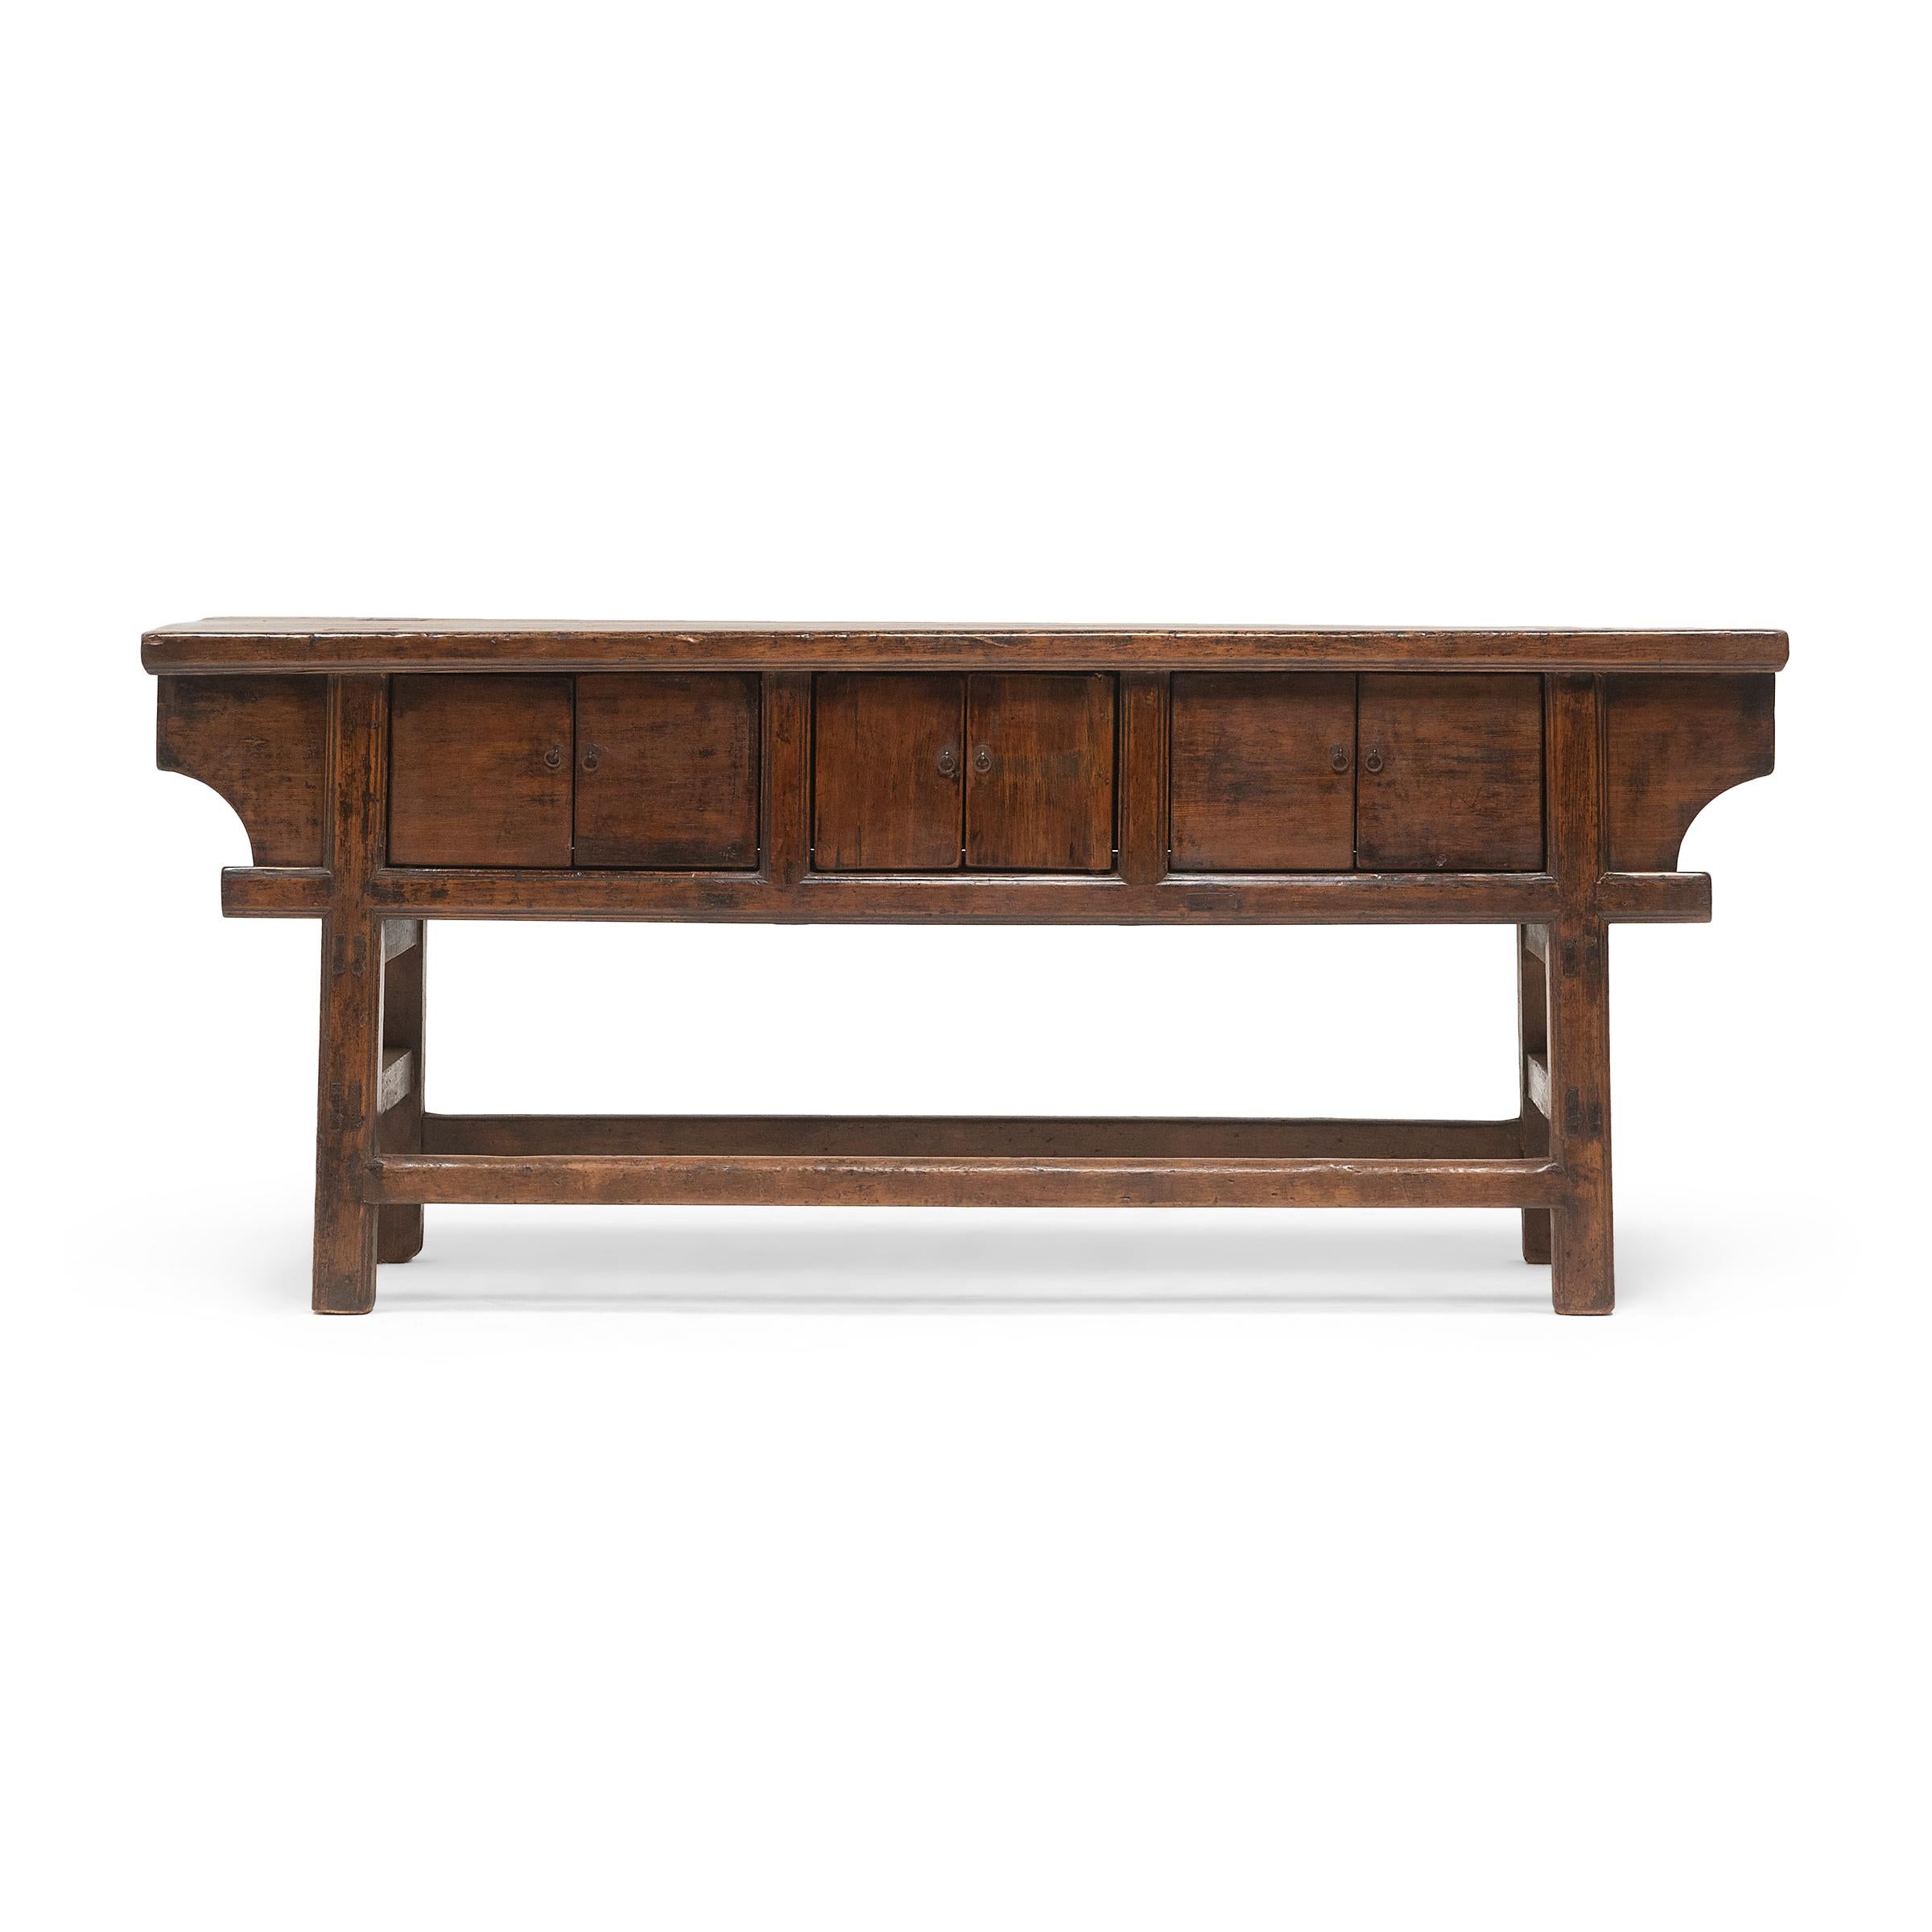 The warm tones and active grain of natural pine wood are the focus of this unusually articulated six-door coffer. Made for a provincial home in northeastern China, this sideboard was once used as a home altar to honor loved ones past and present